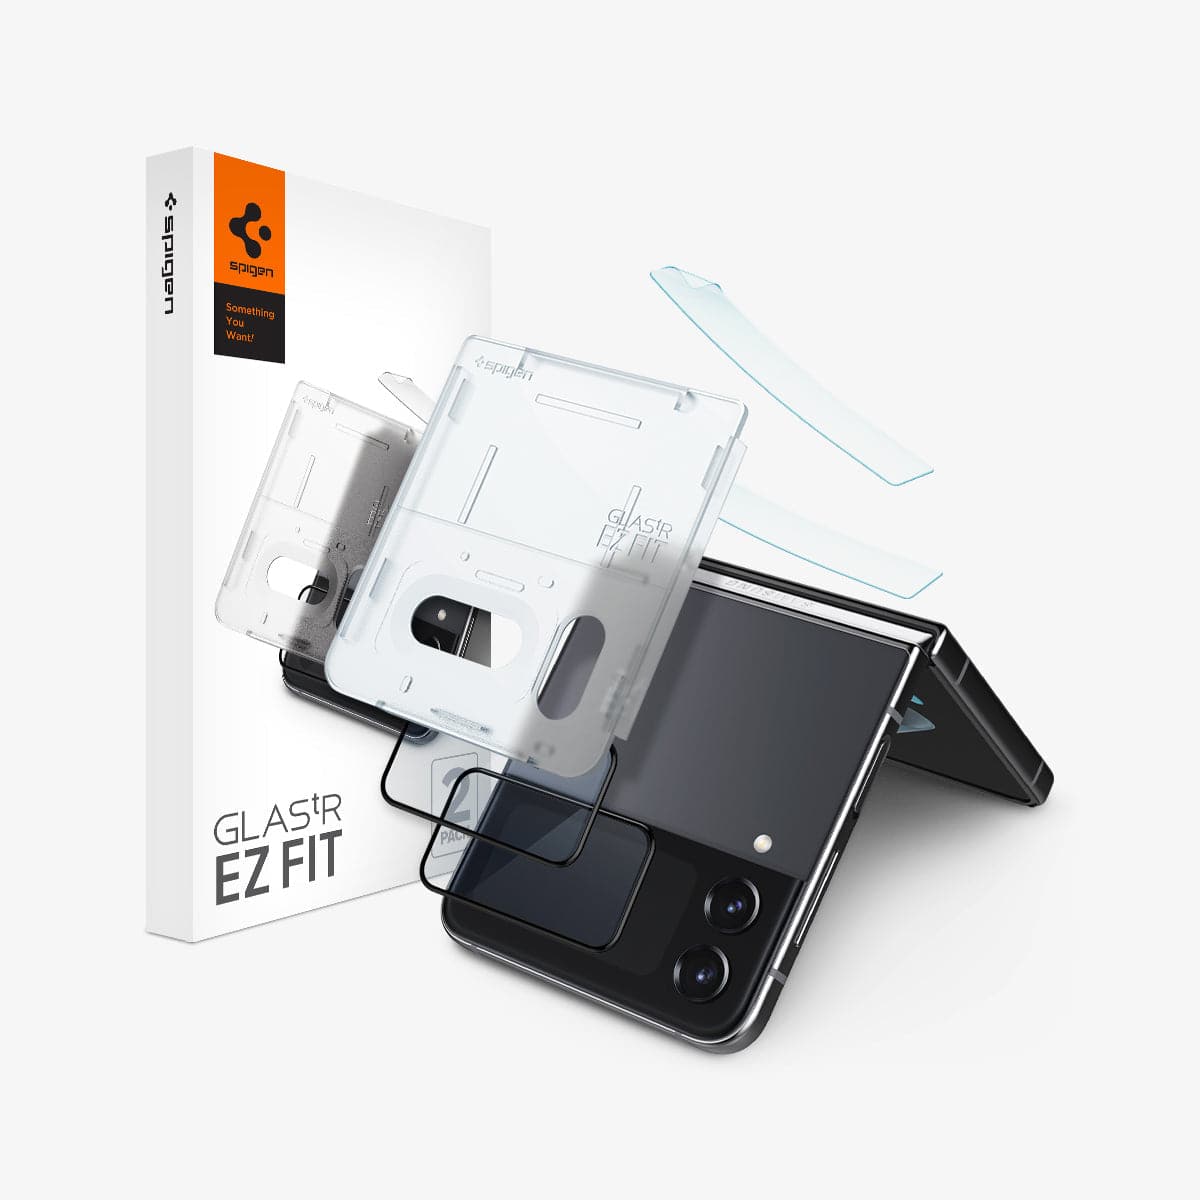 AGL05321 - Galaxy Z Flip 4 Screen Protector GLAS.tR Full Cover Glass + Hinge Film showing the device, two screen protector, hinge film, ez fit tray and packaging